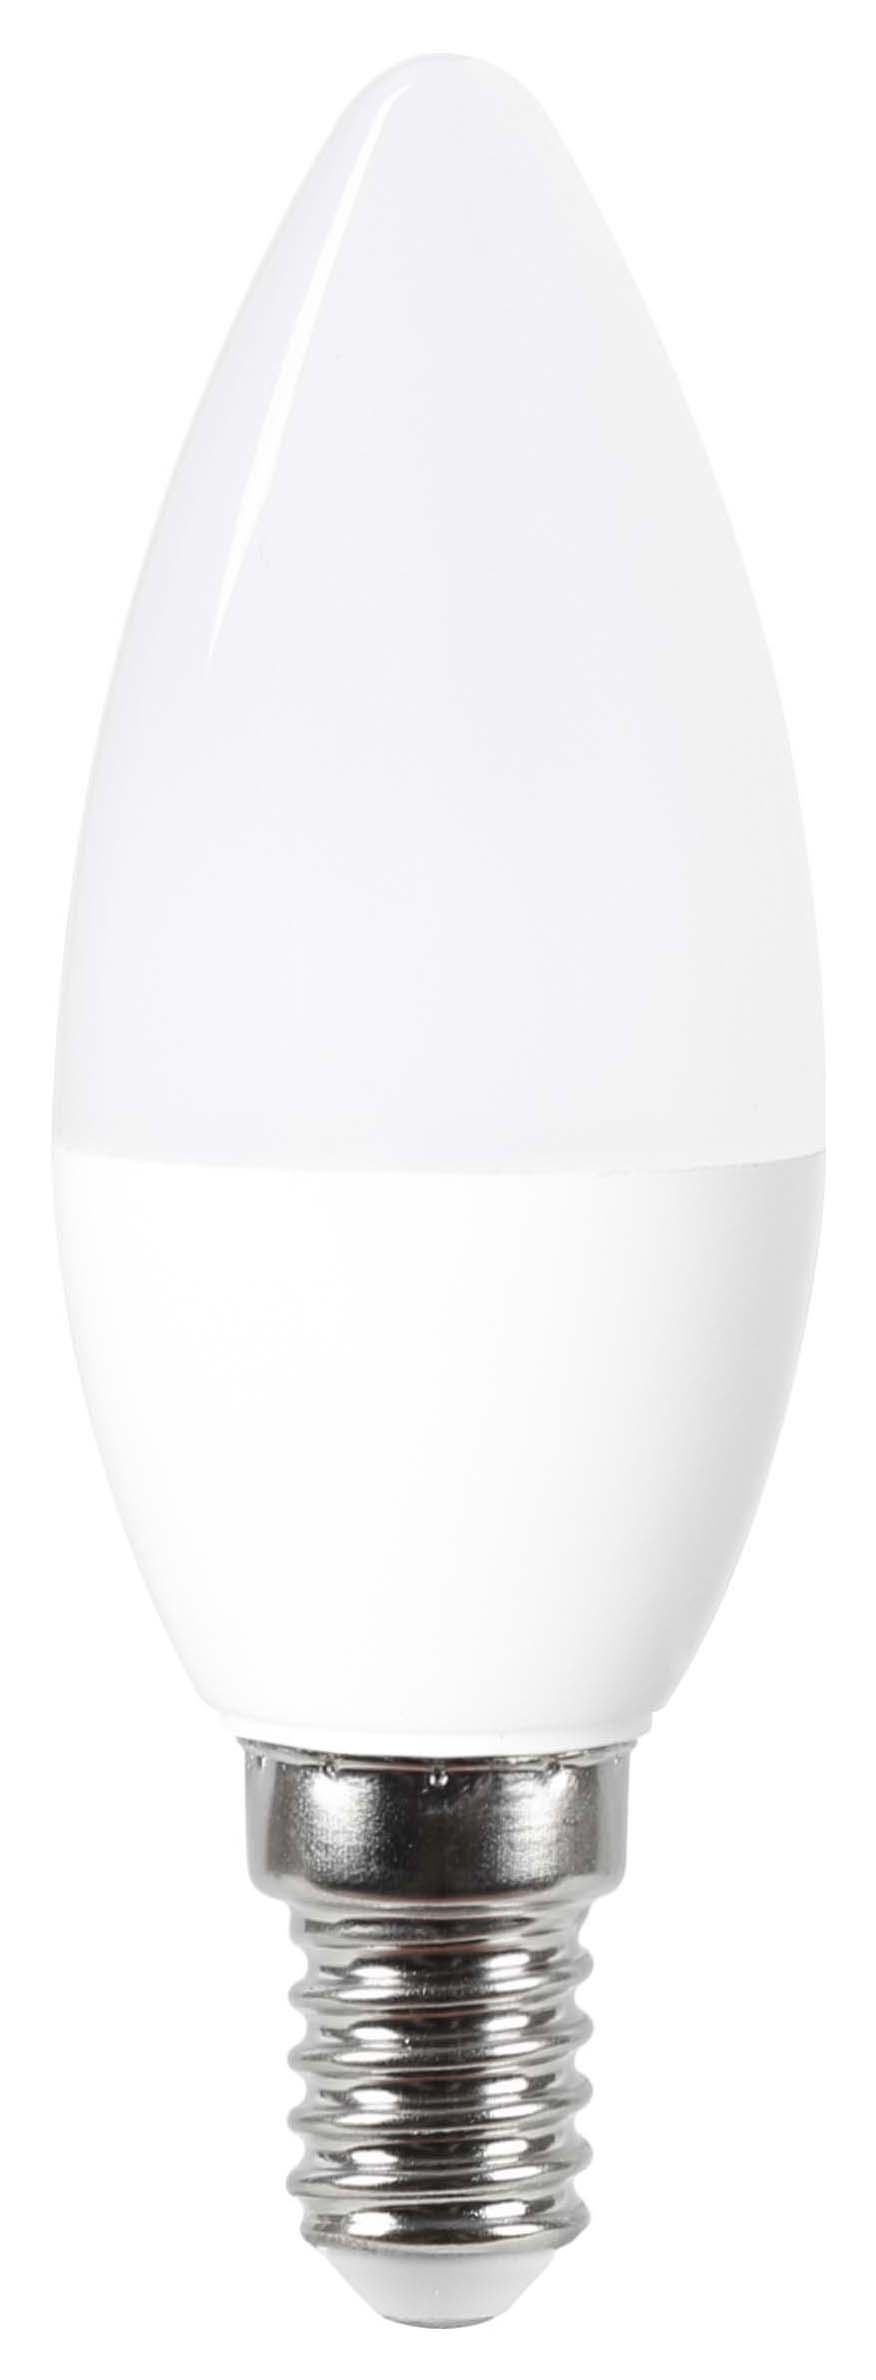 Image of Wickes Dimmable Opal LED E14 Candle 4.9W Warm White Light Bulb